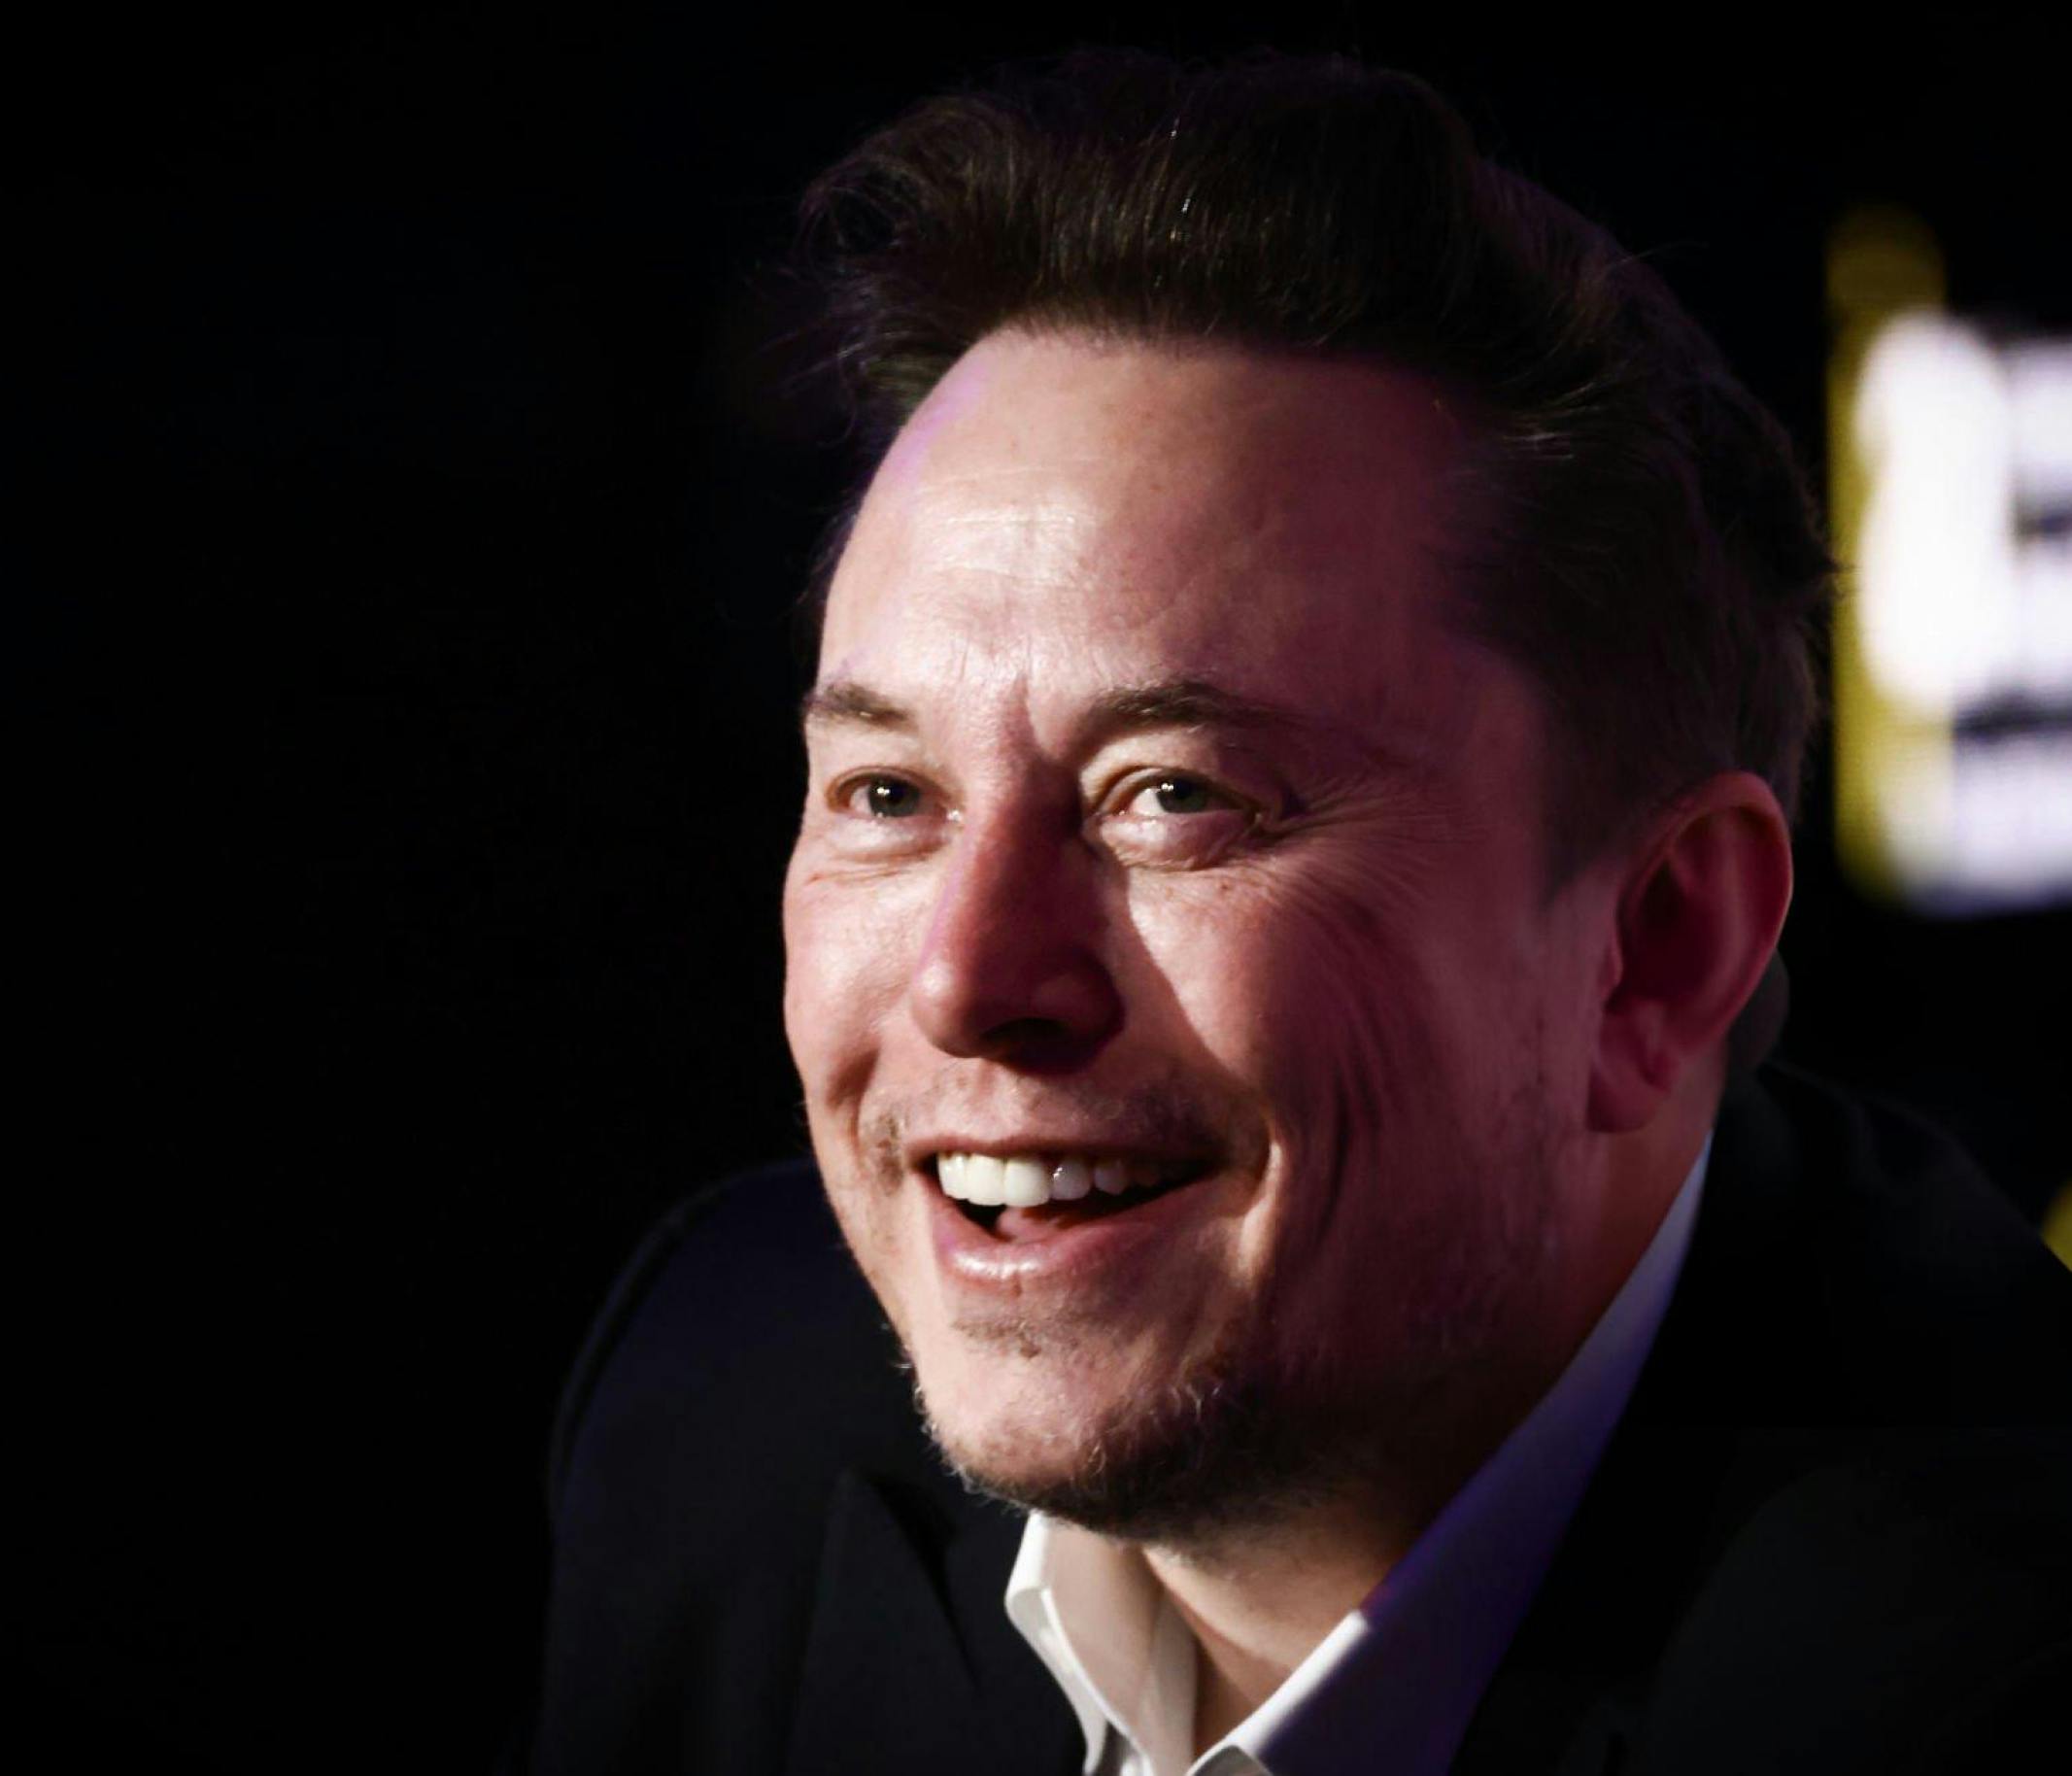 Picture of Elon Musk standing slightly sideways while smiling.